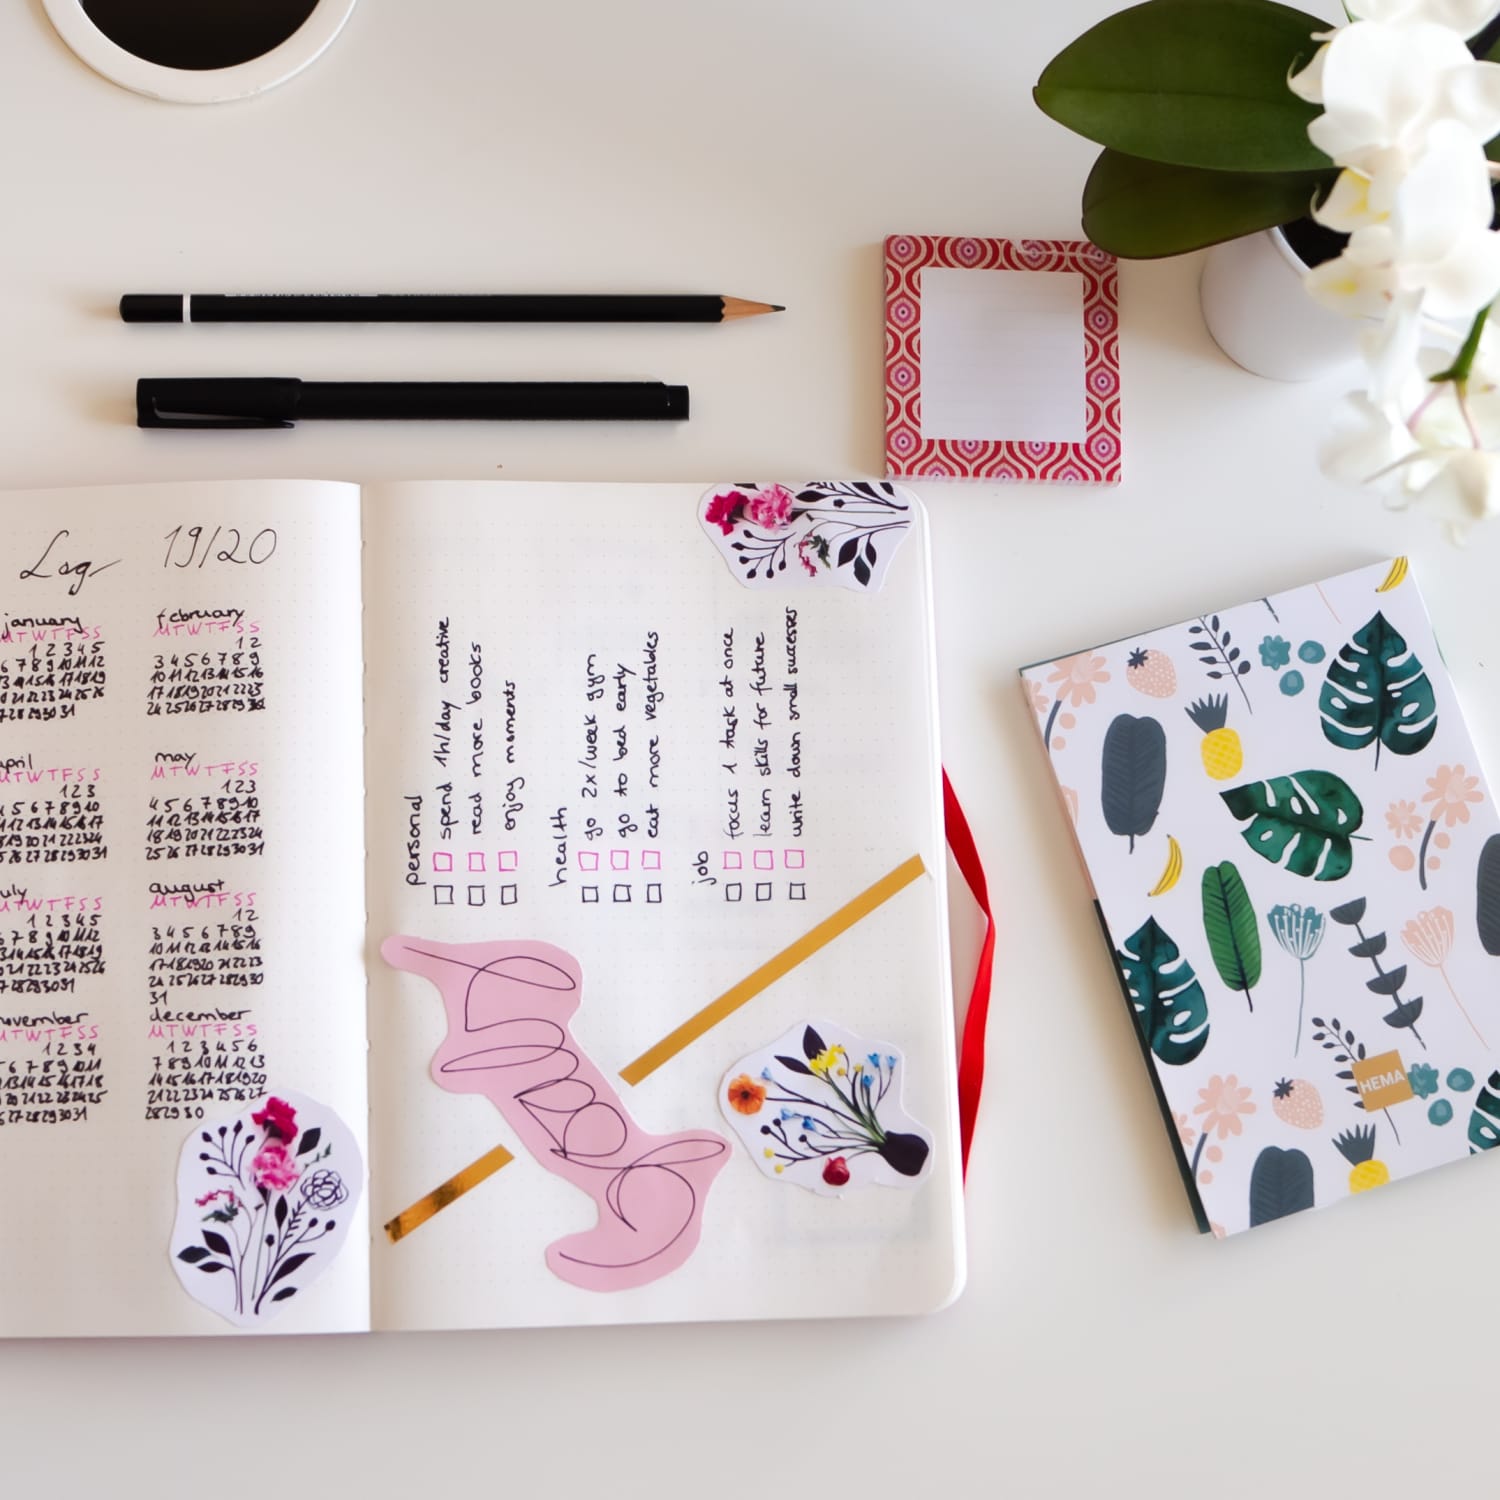 7 Bullet Journal Tools for Beautiful Bujos - Planning Mindfully